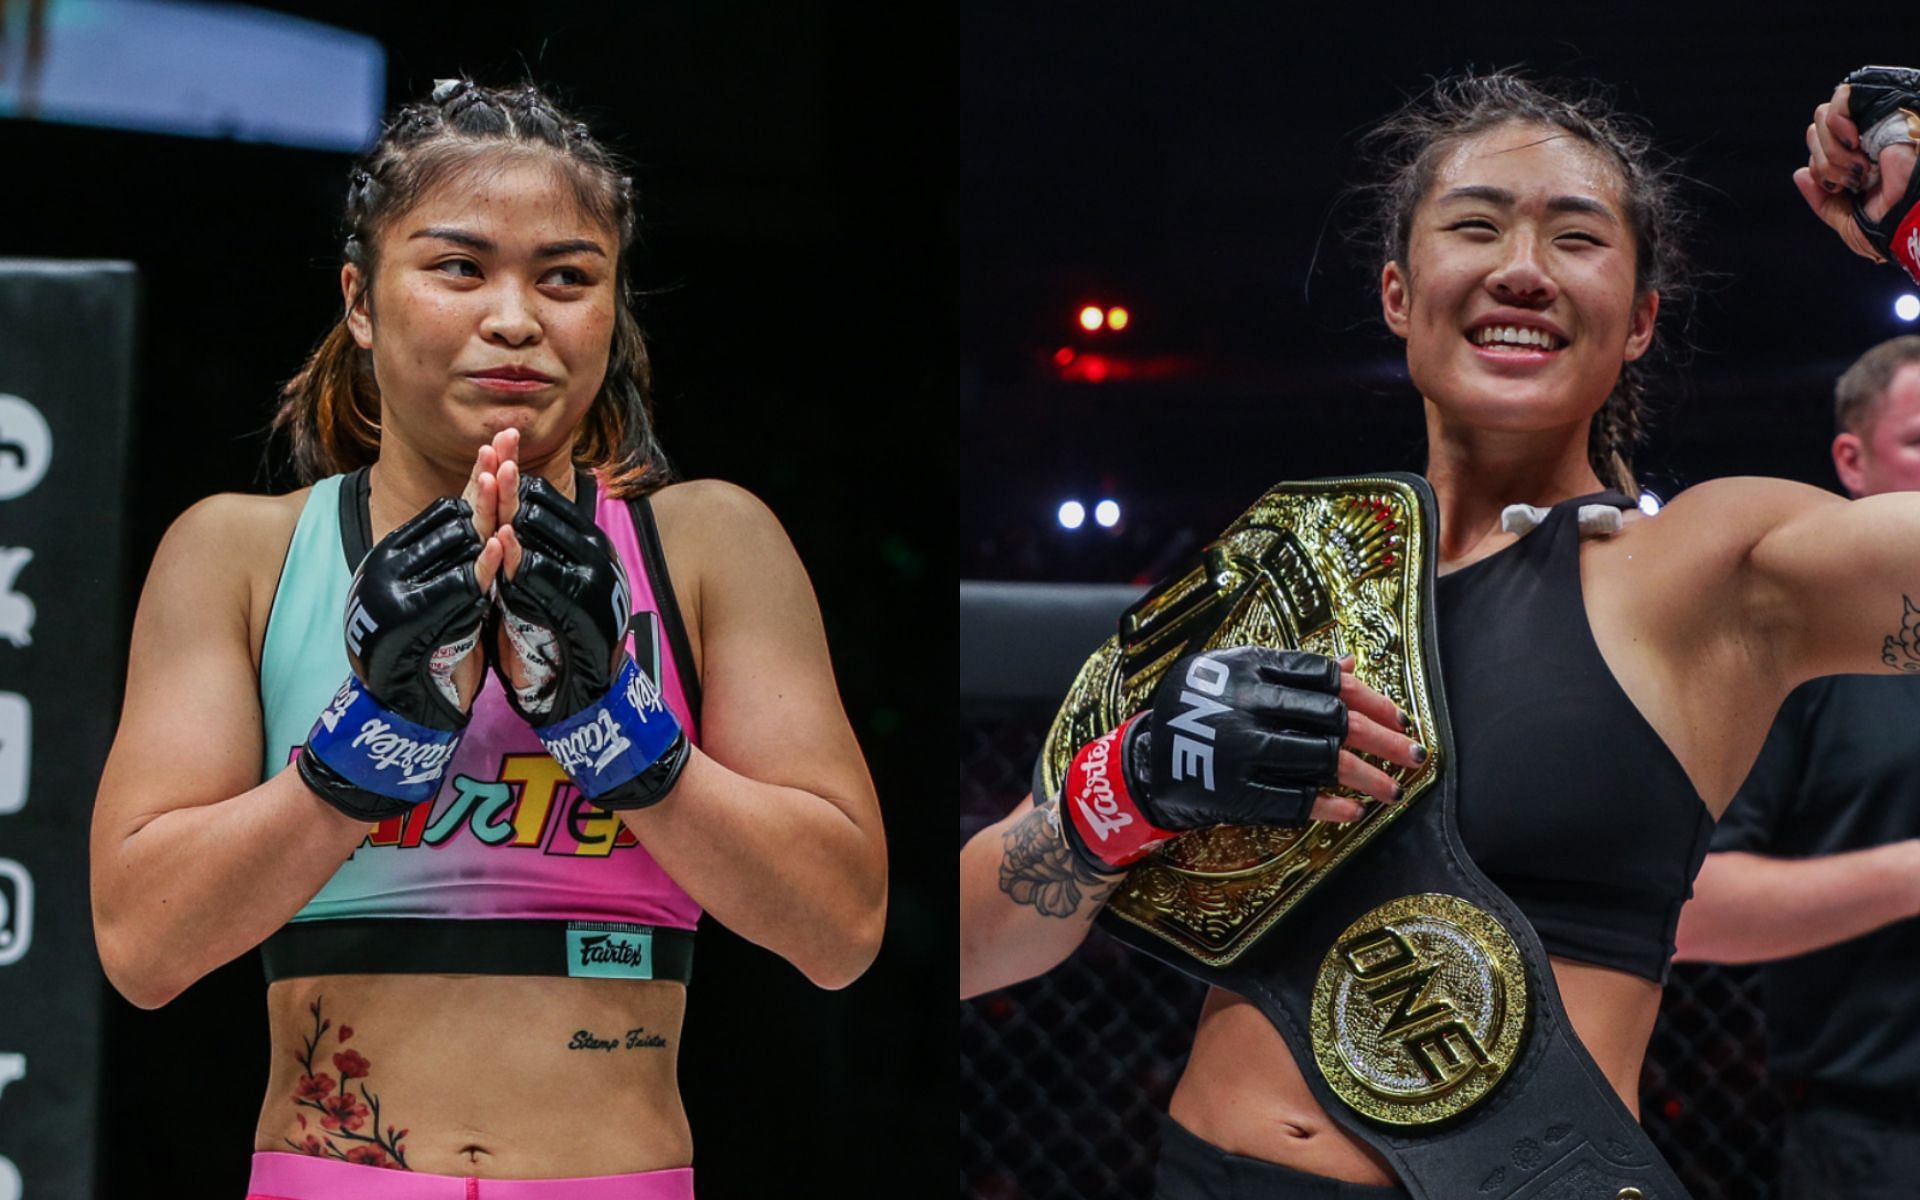 Stamp Fairtex (left) and Angela Lee (right). [Photos ONE Championship]